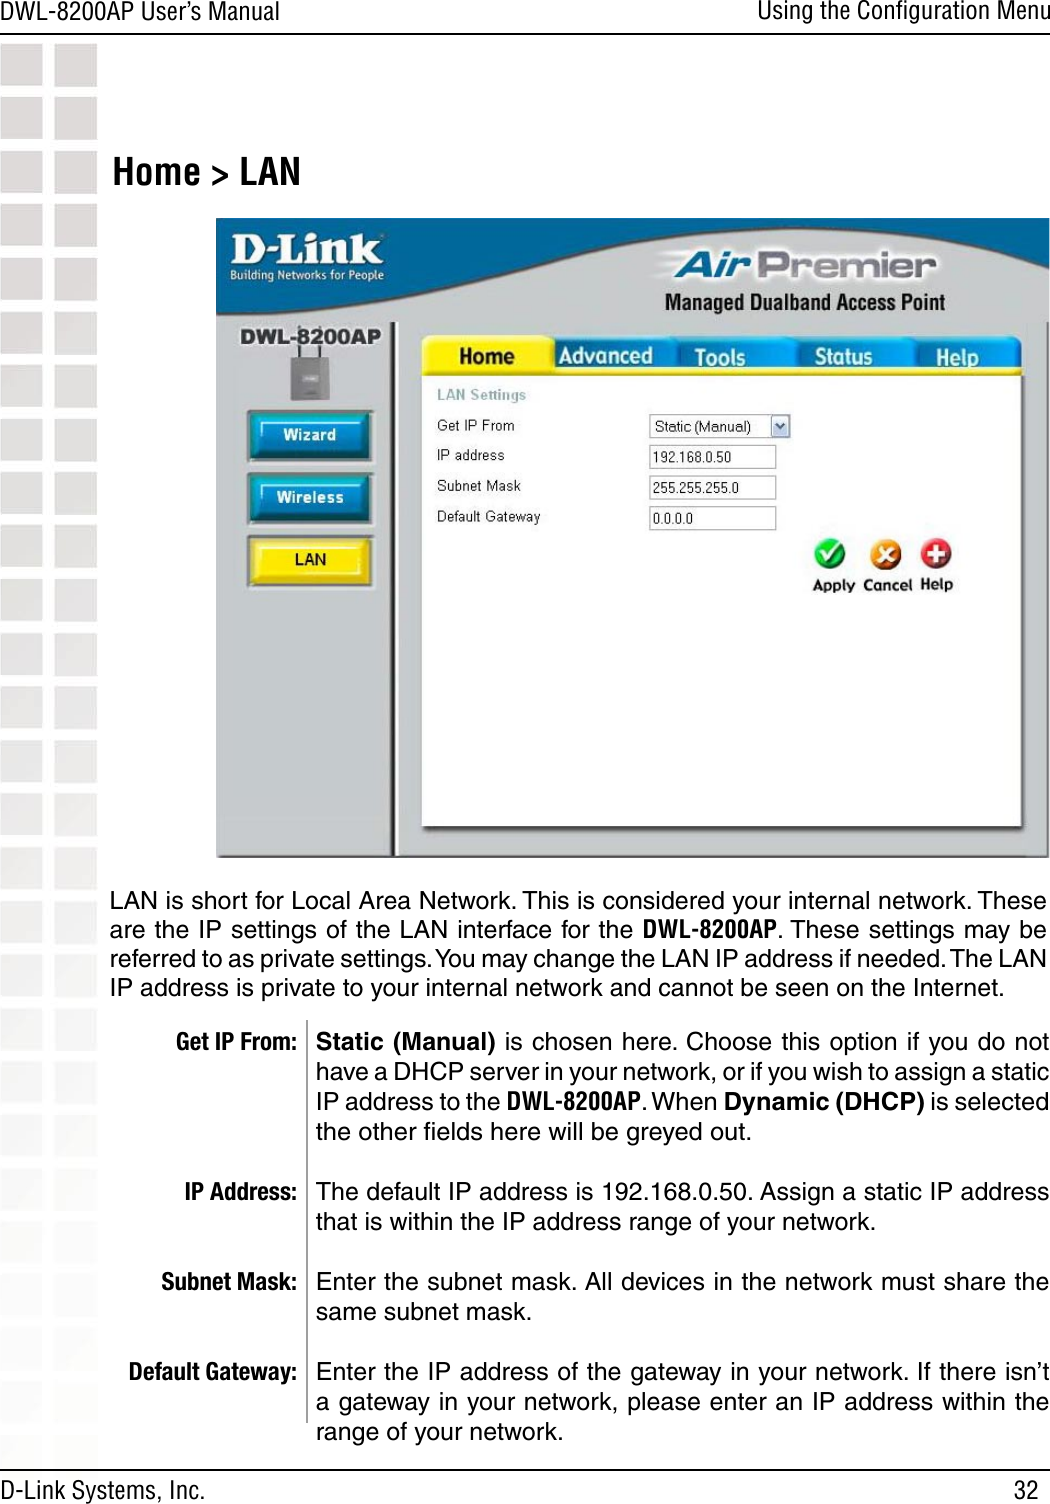 32DWL-8200AP User’s ManualD-Link Systems, Inc.Using the Conﬁguration MenuHome &gt; LAN Static (Manual) is chosen here. Choose this option if you do not have a DHCP server in your network, or if you wish to assign a static IP address to the DWL-8200AP. When Dynamic (DHCP) is selected the other ﬁelds here will be greyed out.The default IP address is 192.168.0.50. Assign a static IP address that is within the IP address range of your network.Enter the subnet mask. All devices in the network must share the same subnet mask.Enter the IP address of the gateway in your network. If there isn’t a gateway in your network, please enter an IP address within the range of your network.Get IP From:IP Address:Subnet Mask:Default Gateway:LAN is short for Local Area Network. This is considered your internal network. These are the IP settings of the LAN interface for the DWL-8200AP. These settings may be referred to as private settings. You may change the LAN IP address if needed. The LAN IP address is private to your internal network and cannot be seen on the Internet.